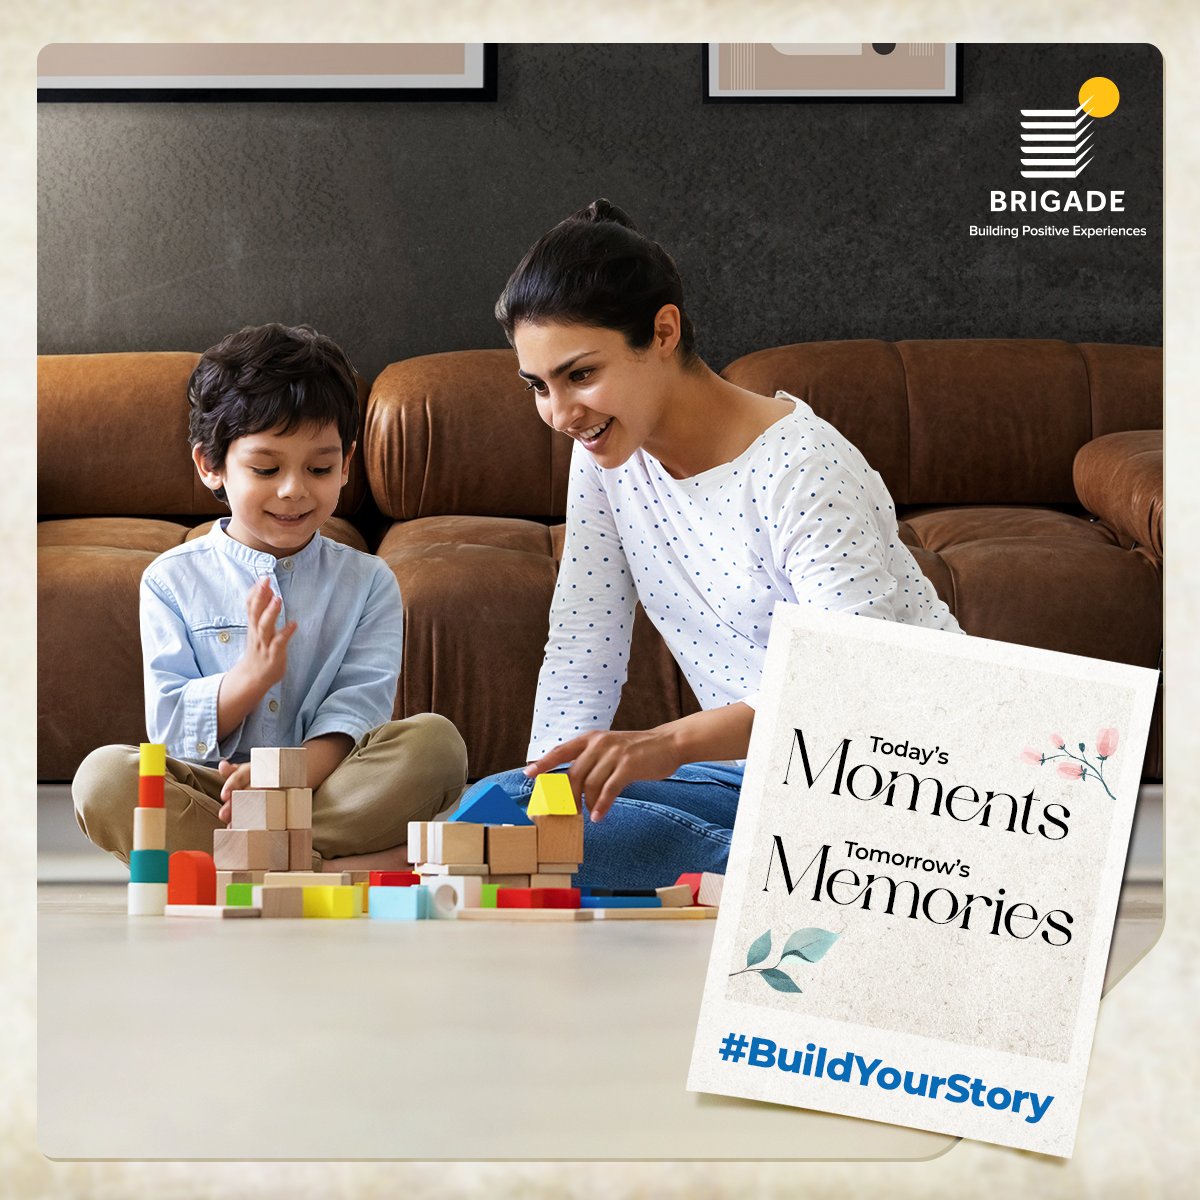 Make space for your most cherished memories, in a home that holds your precious moments. #BuildYourStory with Brigade homes and watch every corner and room unfold a tale.

#BrigadeGroup #RealEstateIndia #Homes #Residential #India